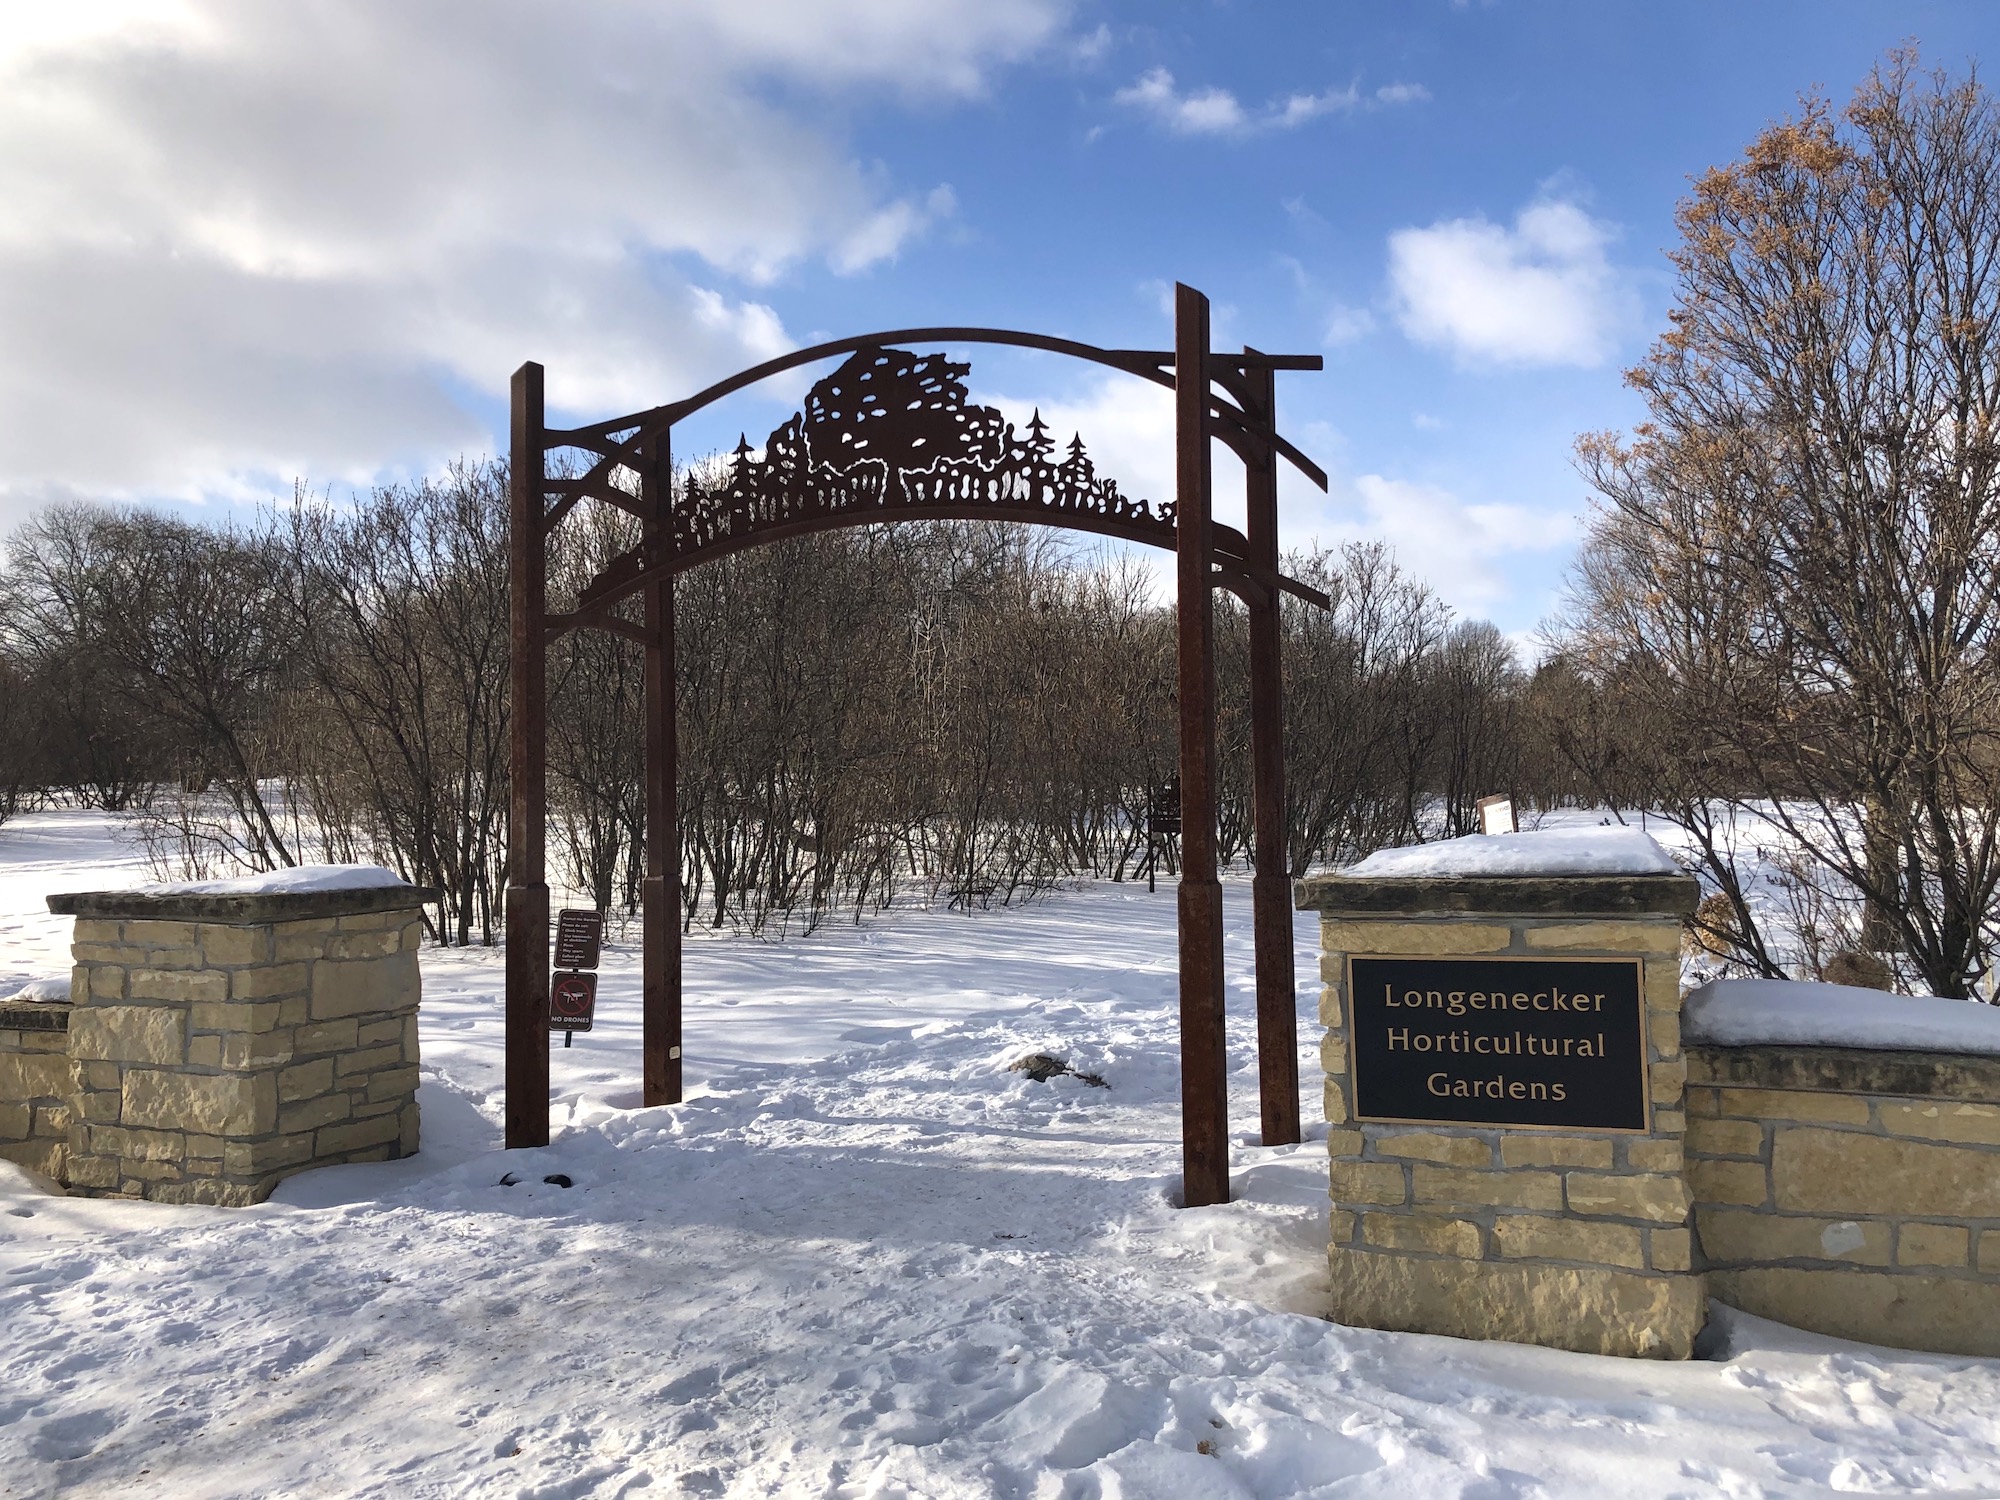 Entrance arch for Longenecker Gardens at the University of Wisconsin Arboretum in Madison, Wisconsin.